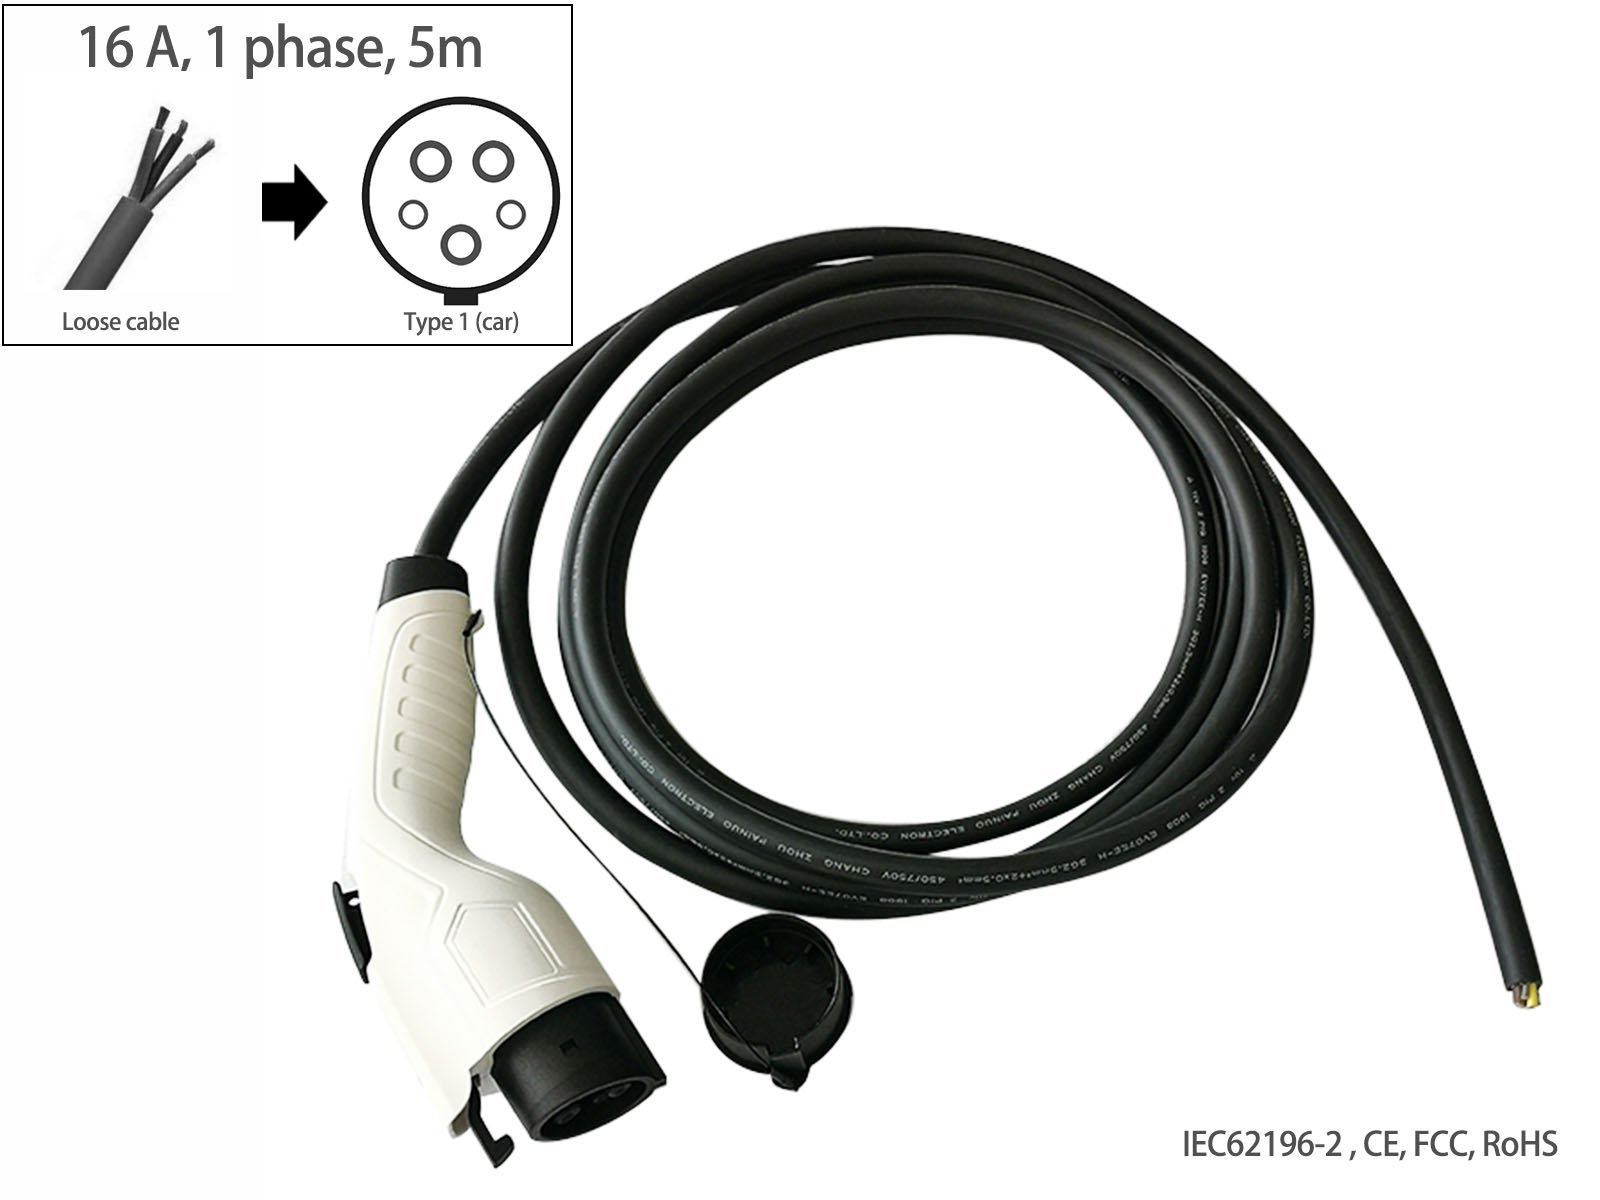 EV charging cable,Loose cable to Type 1 (car),16A,single phase,5m,Fisher - Torque Alliance